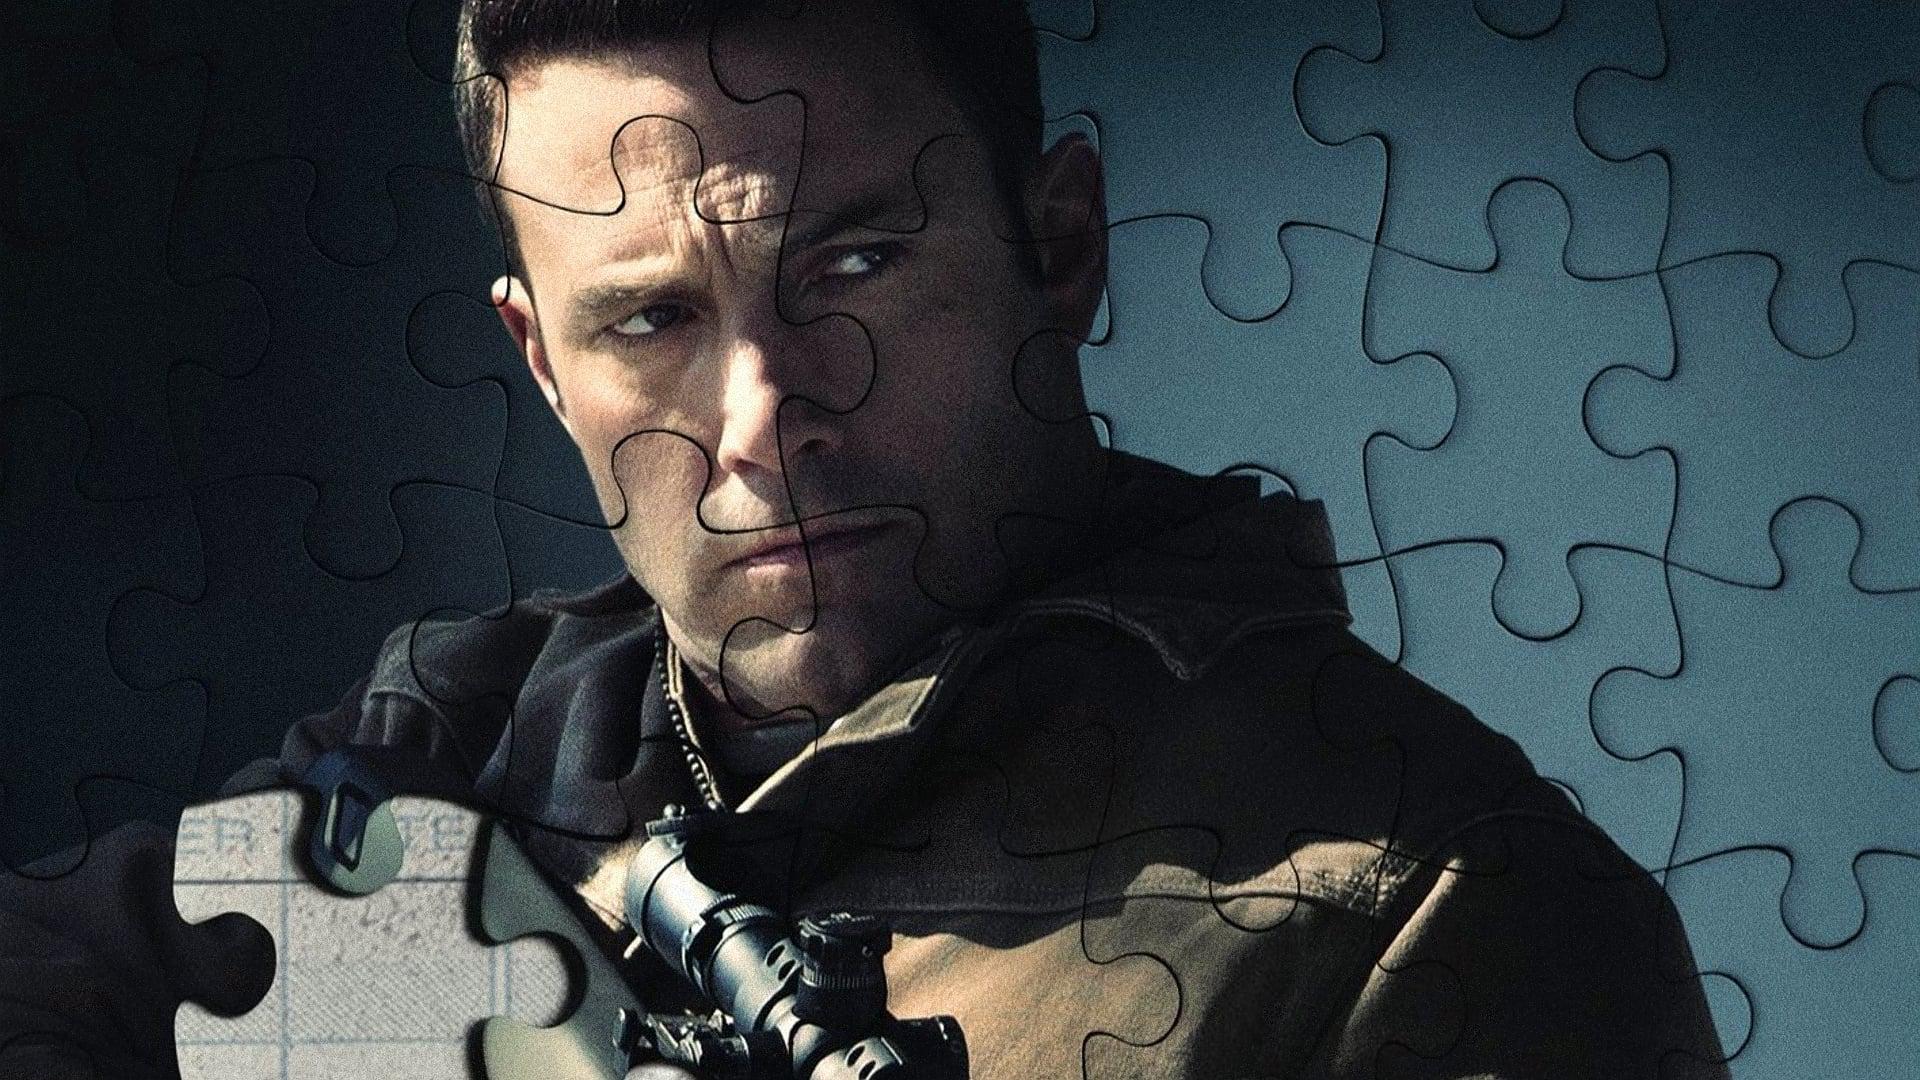 Backdrop Image for The Accountant